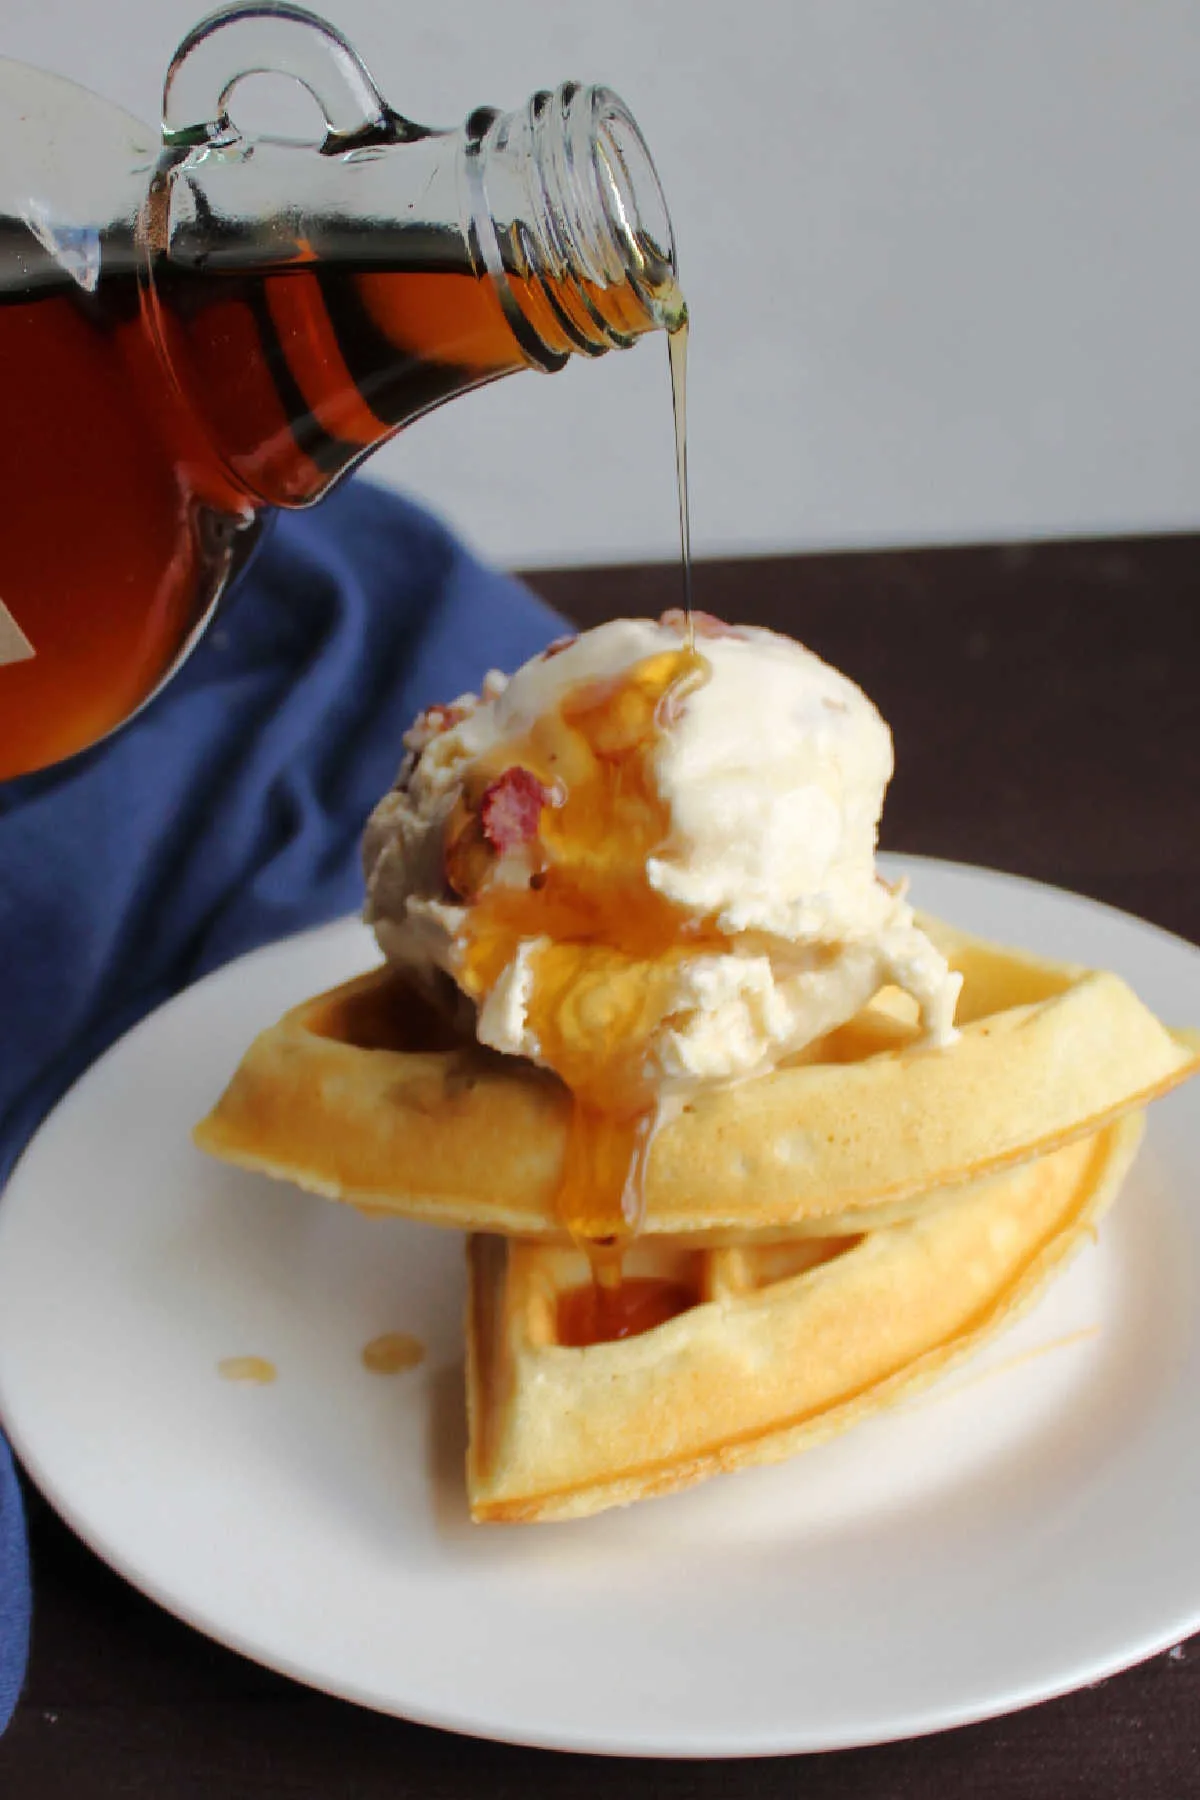 Pouring maple syrup over scoop of maple bacon ice cream perched on top of a couple pieces of Belgian waffle.